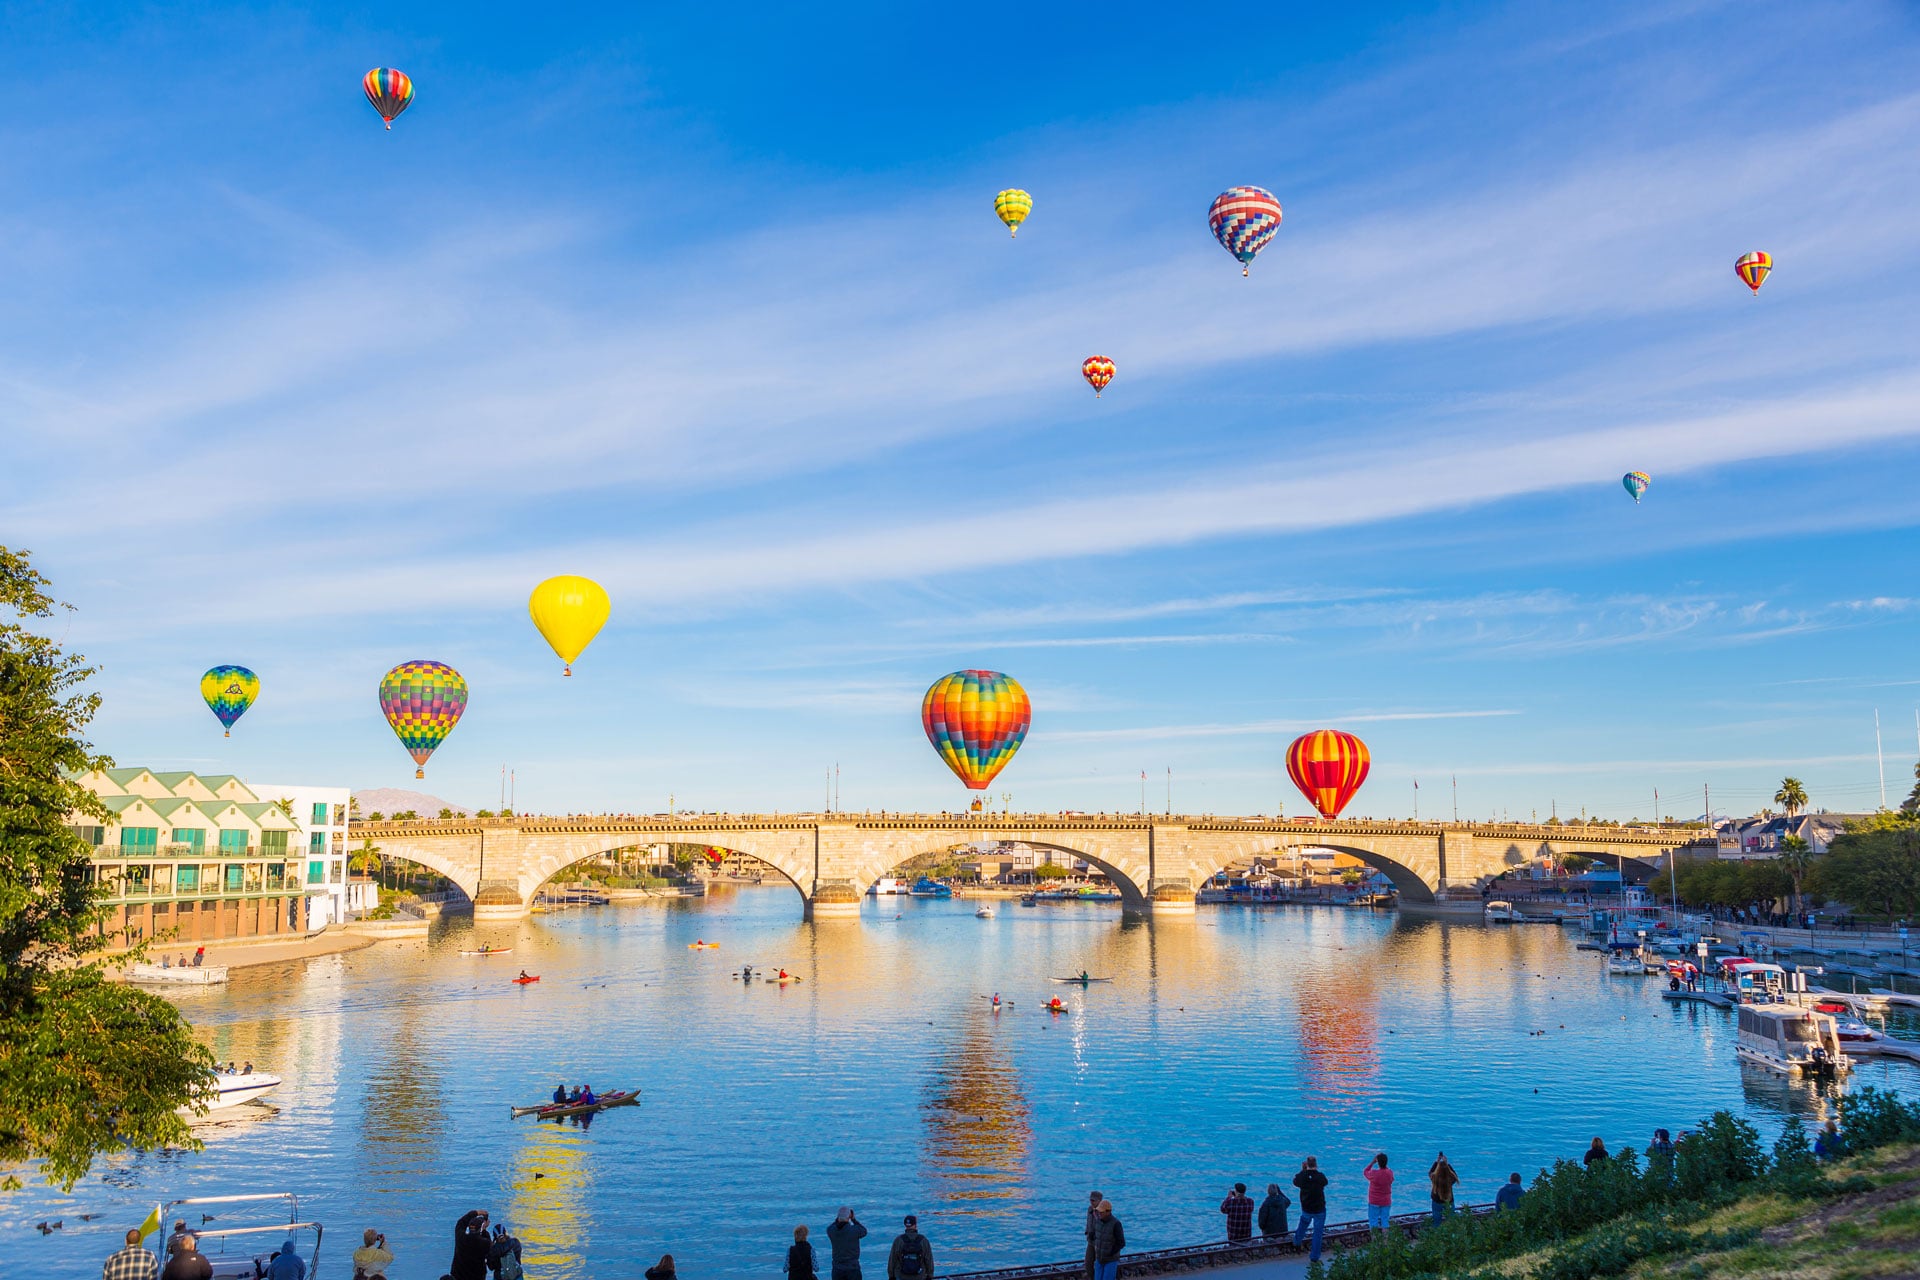 hot air balloons fill the air above water